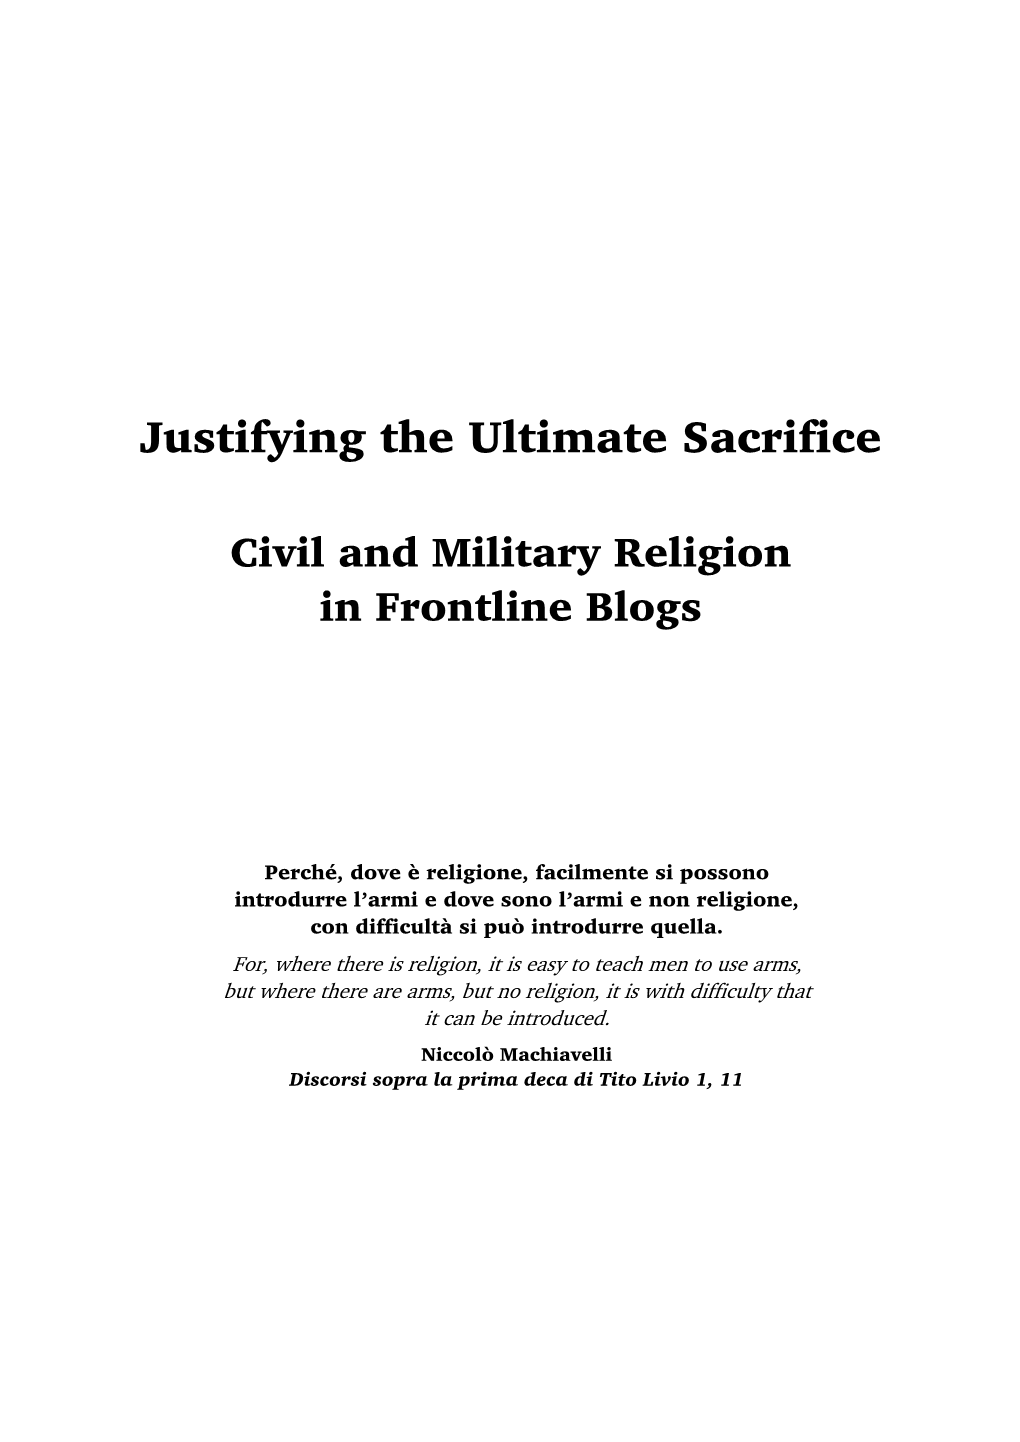 Justifying the Ultimate Sacrifice: Civil and Military Religion in Frontline Blogs